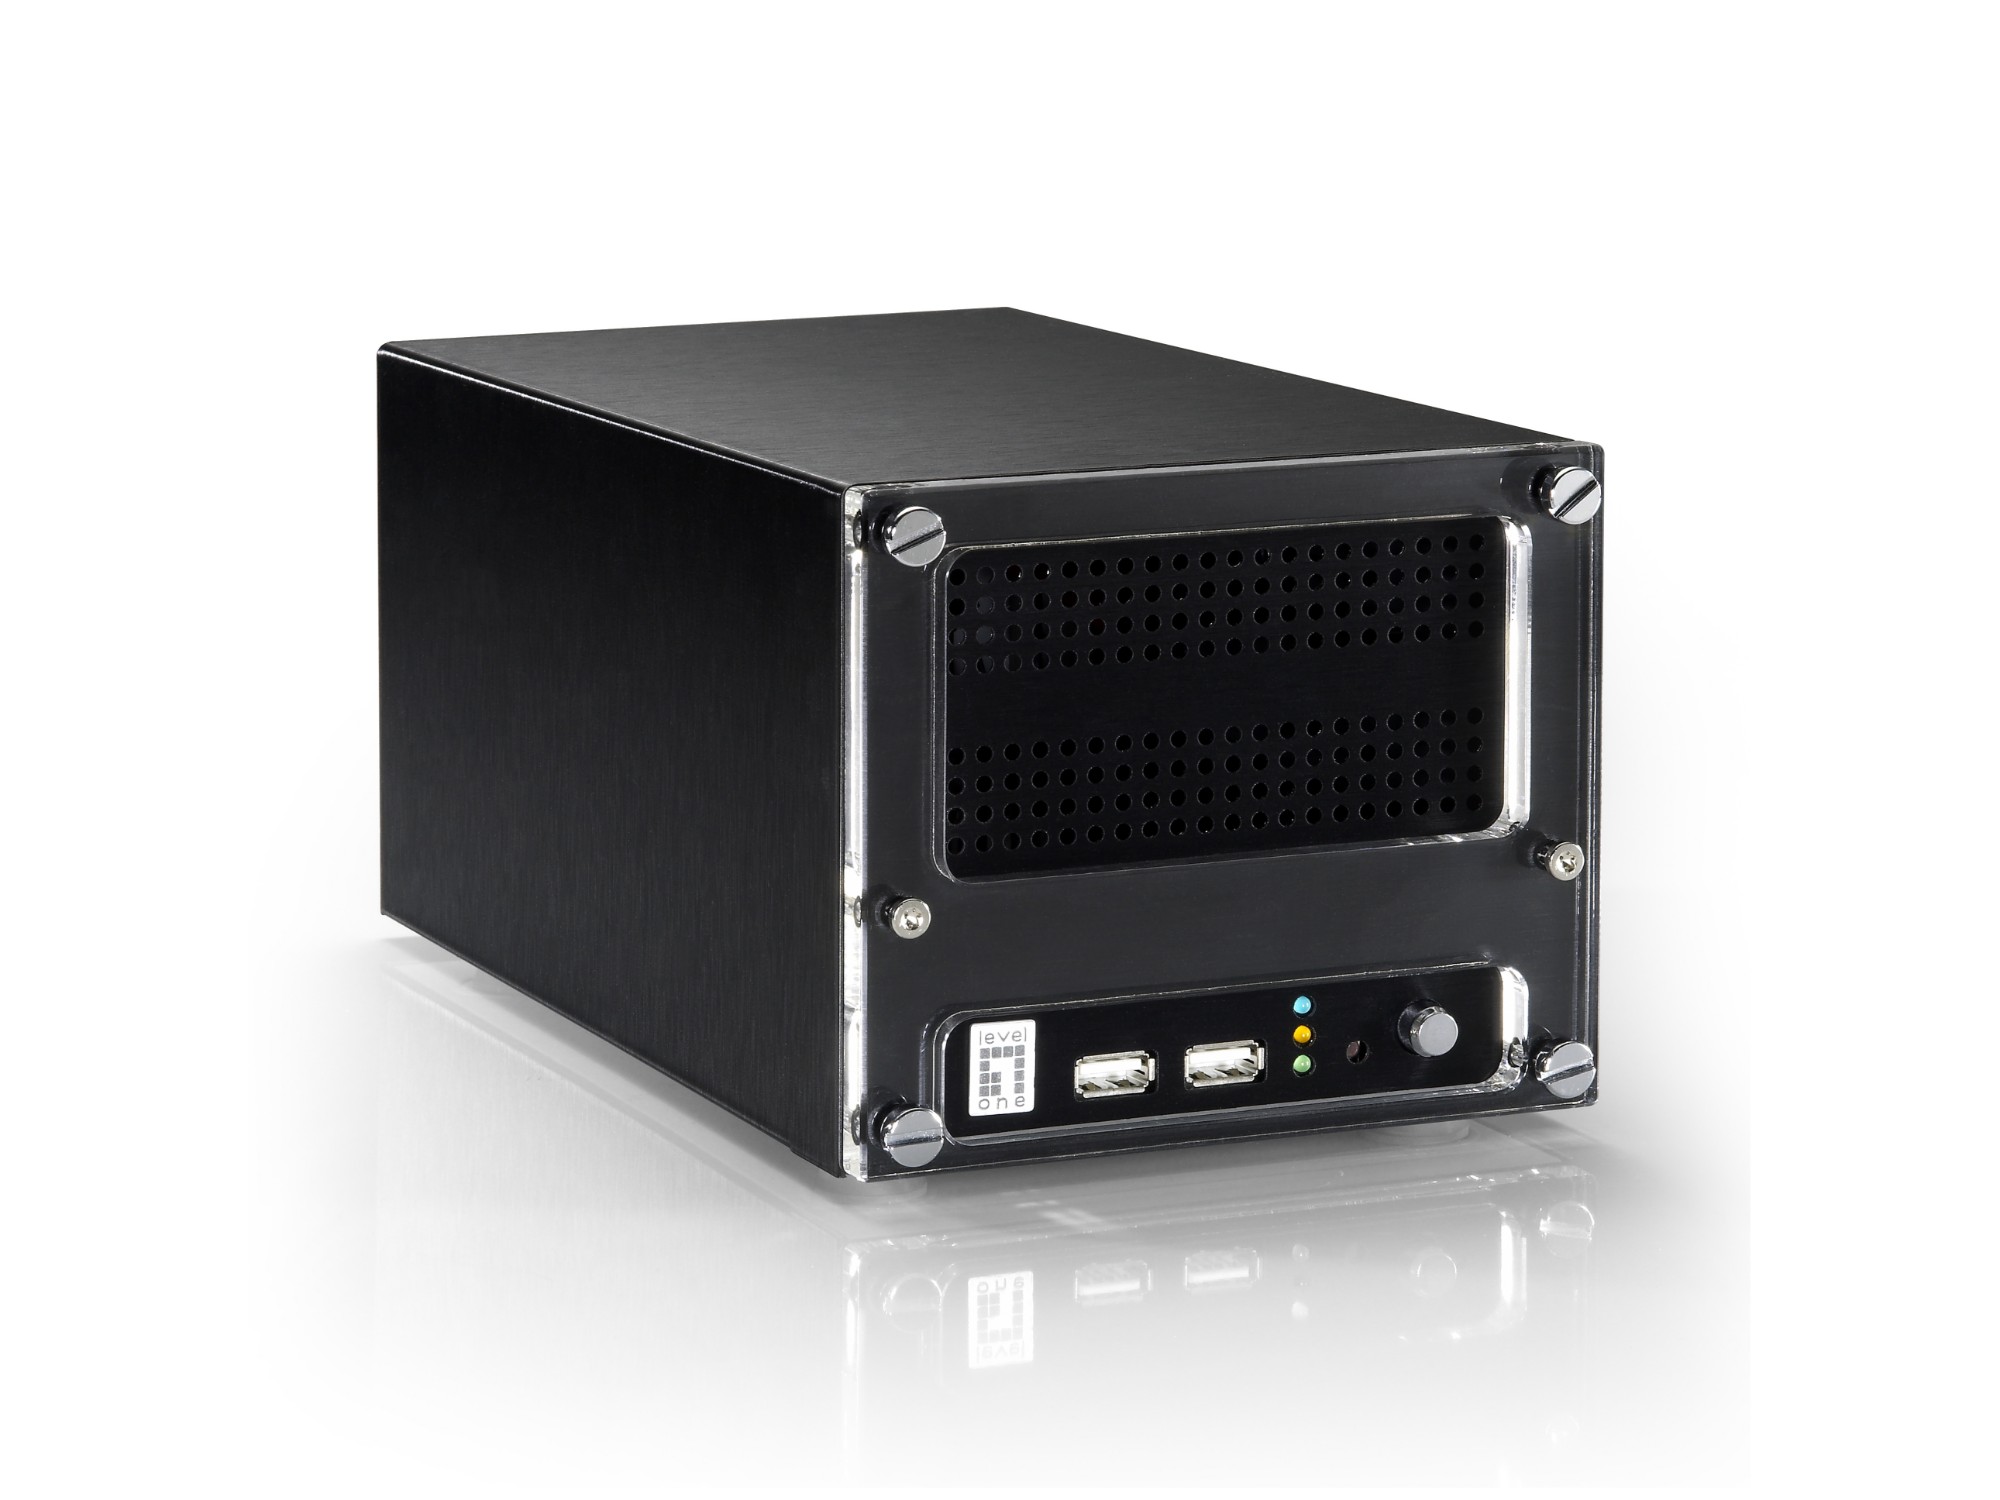 LevelOne HUBBLE 16-Channel Network Video Recorder